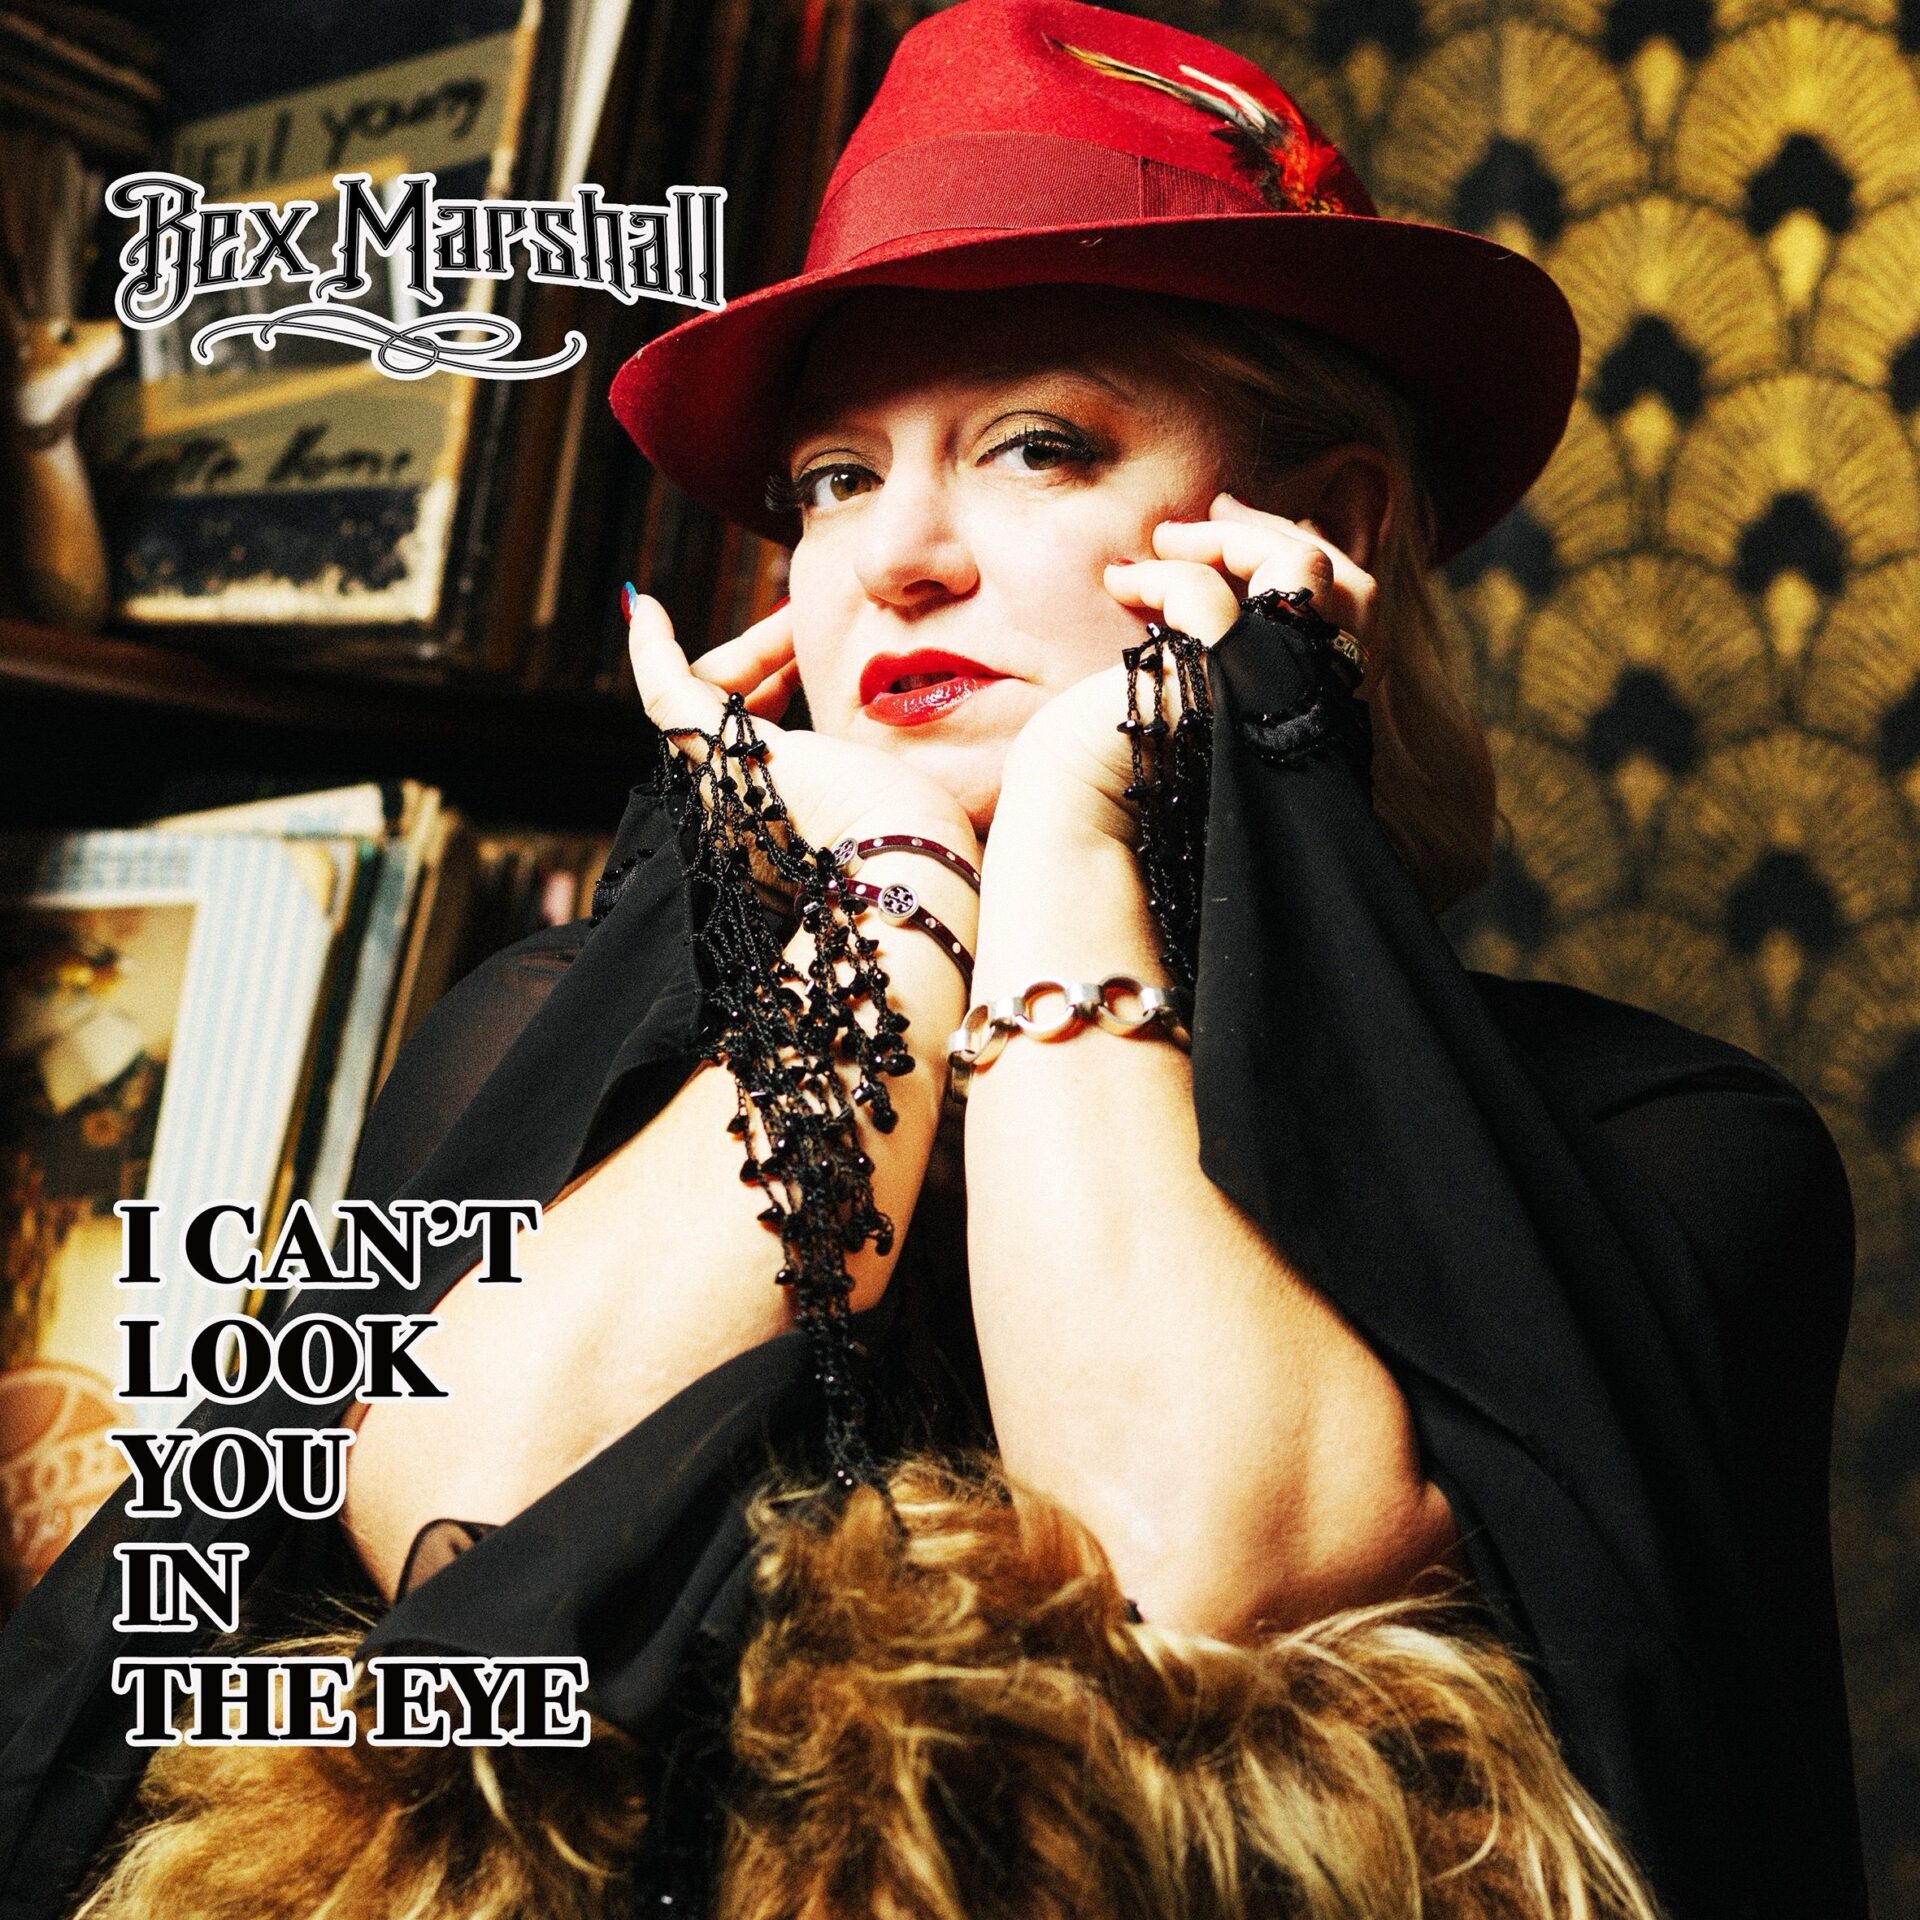 Bex Marshall Shares “I Can’t Look You In The Eye” Video